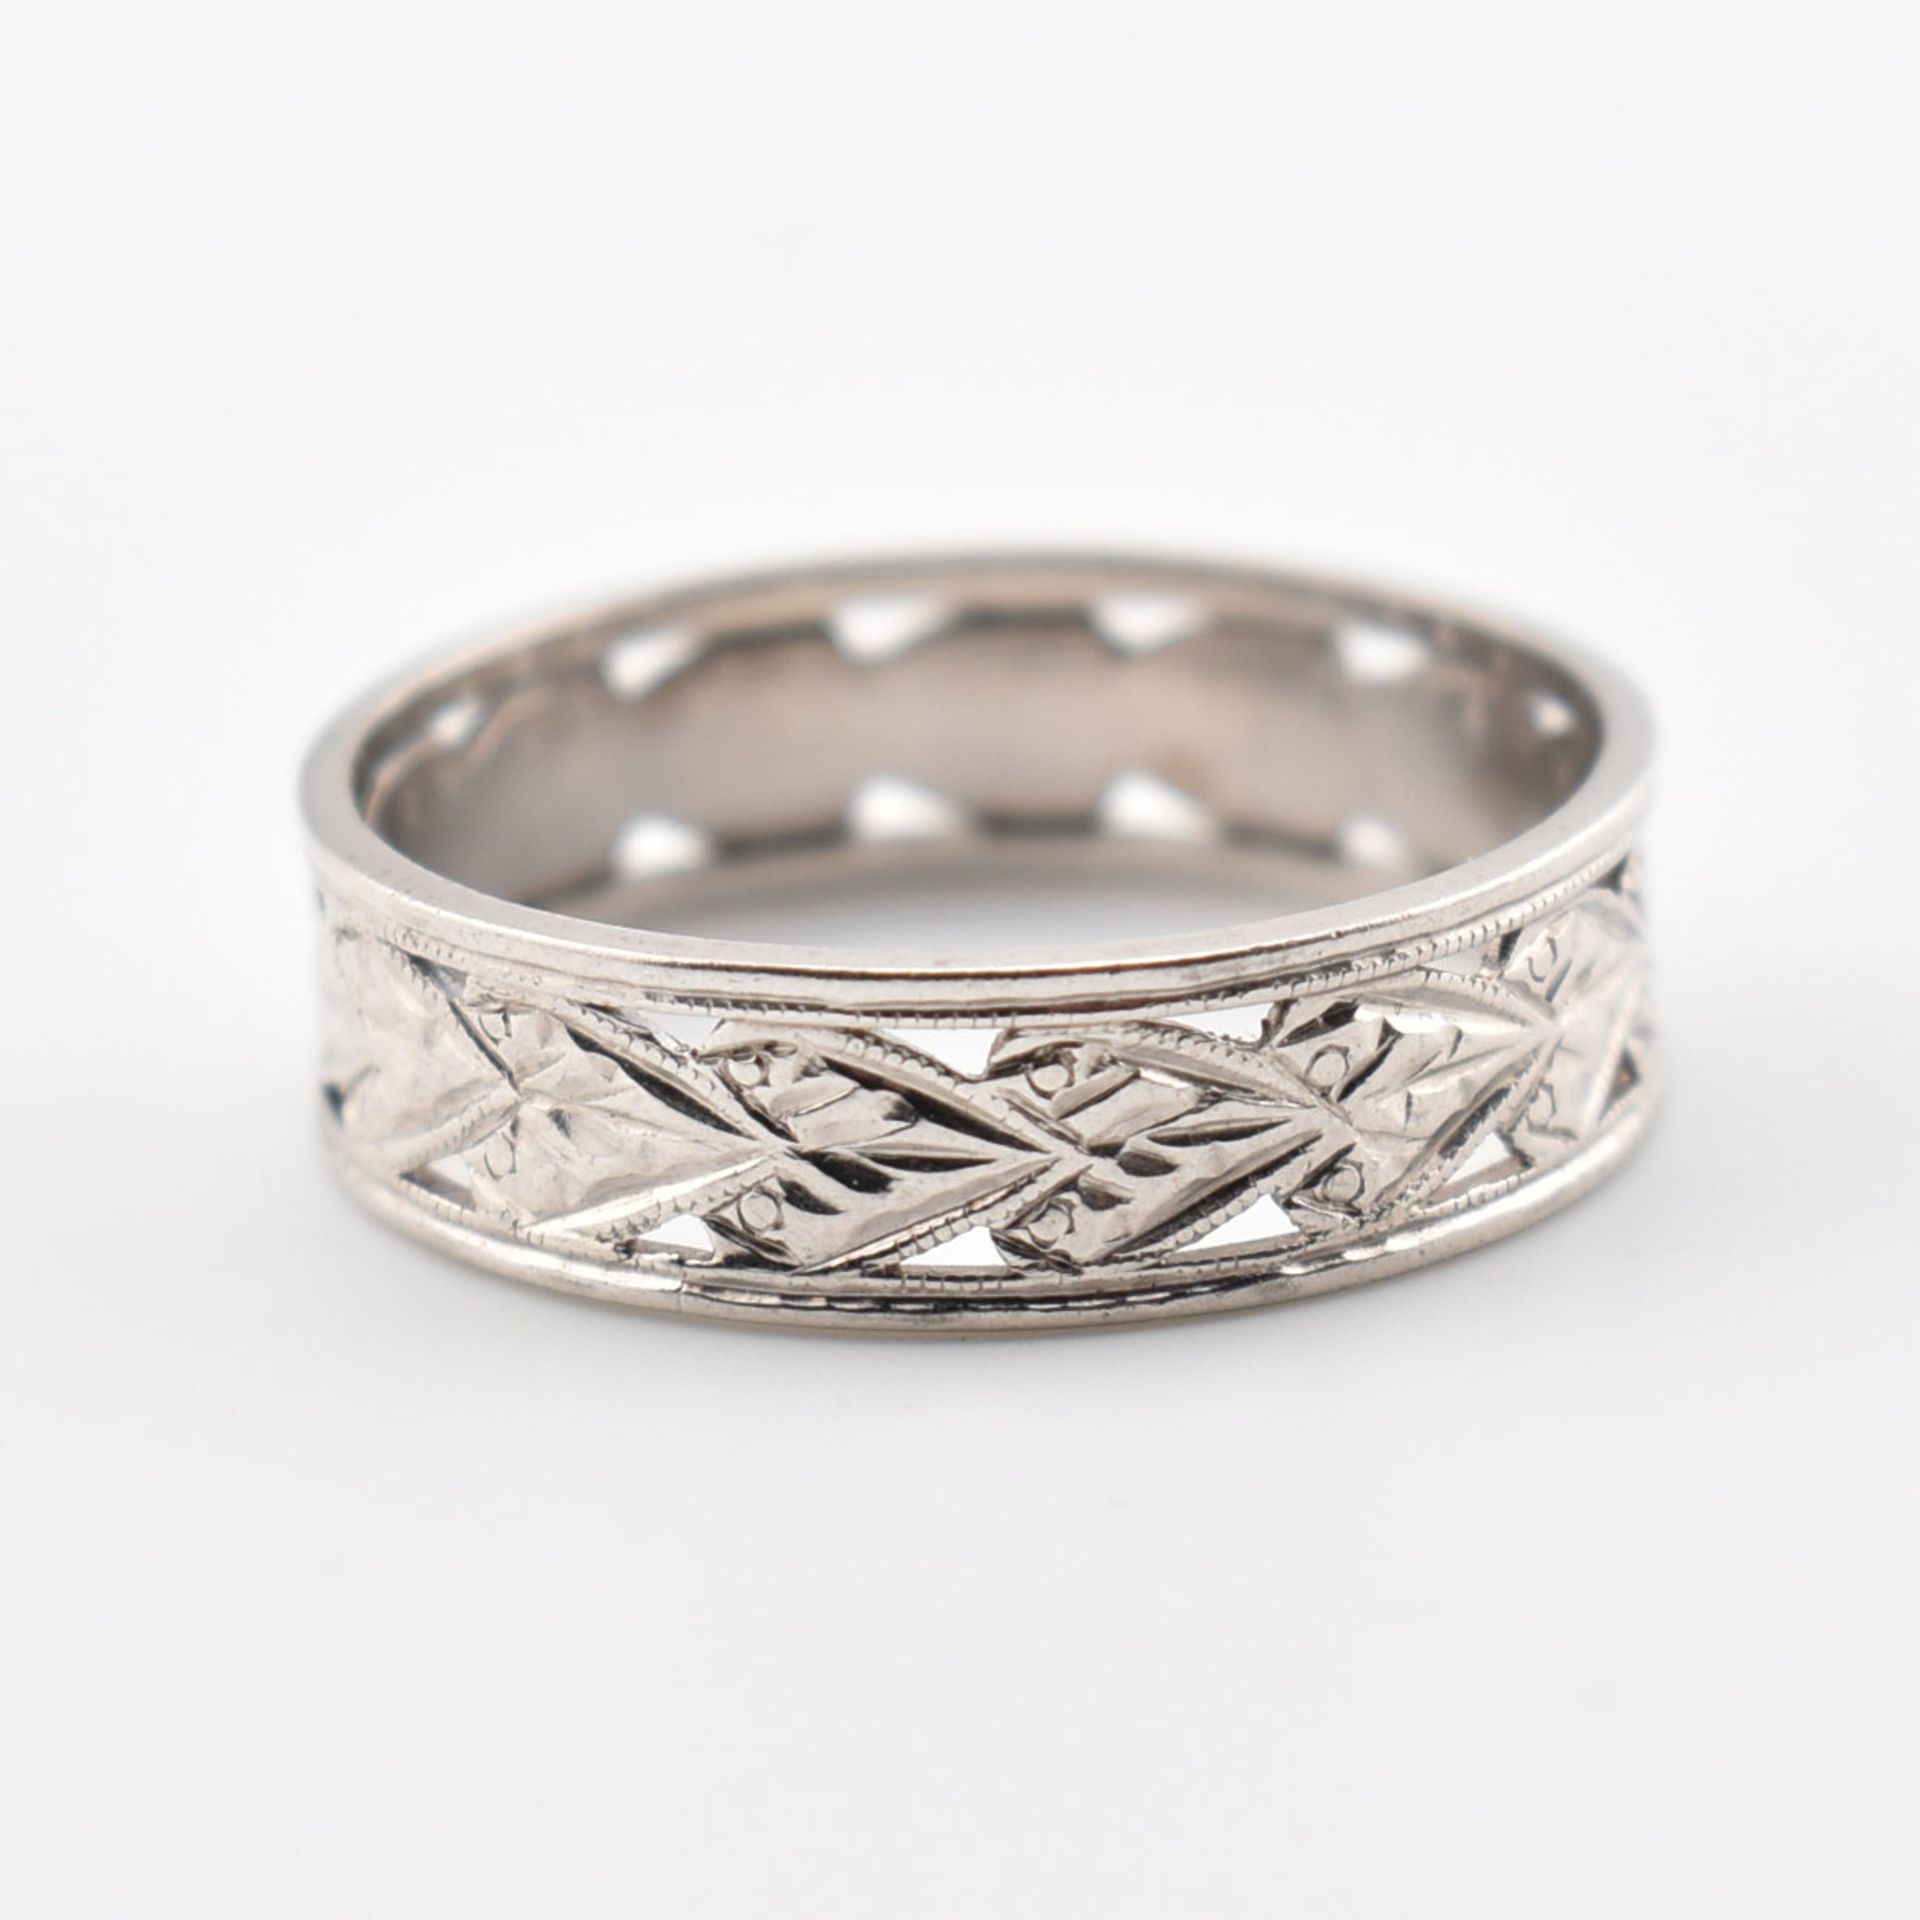 EARLY 20TH CENTURY OPENWORK HEART BAND RING - Image 6 of 7